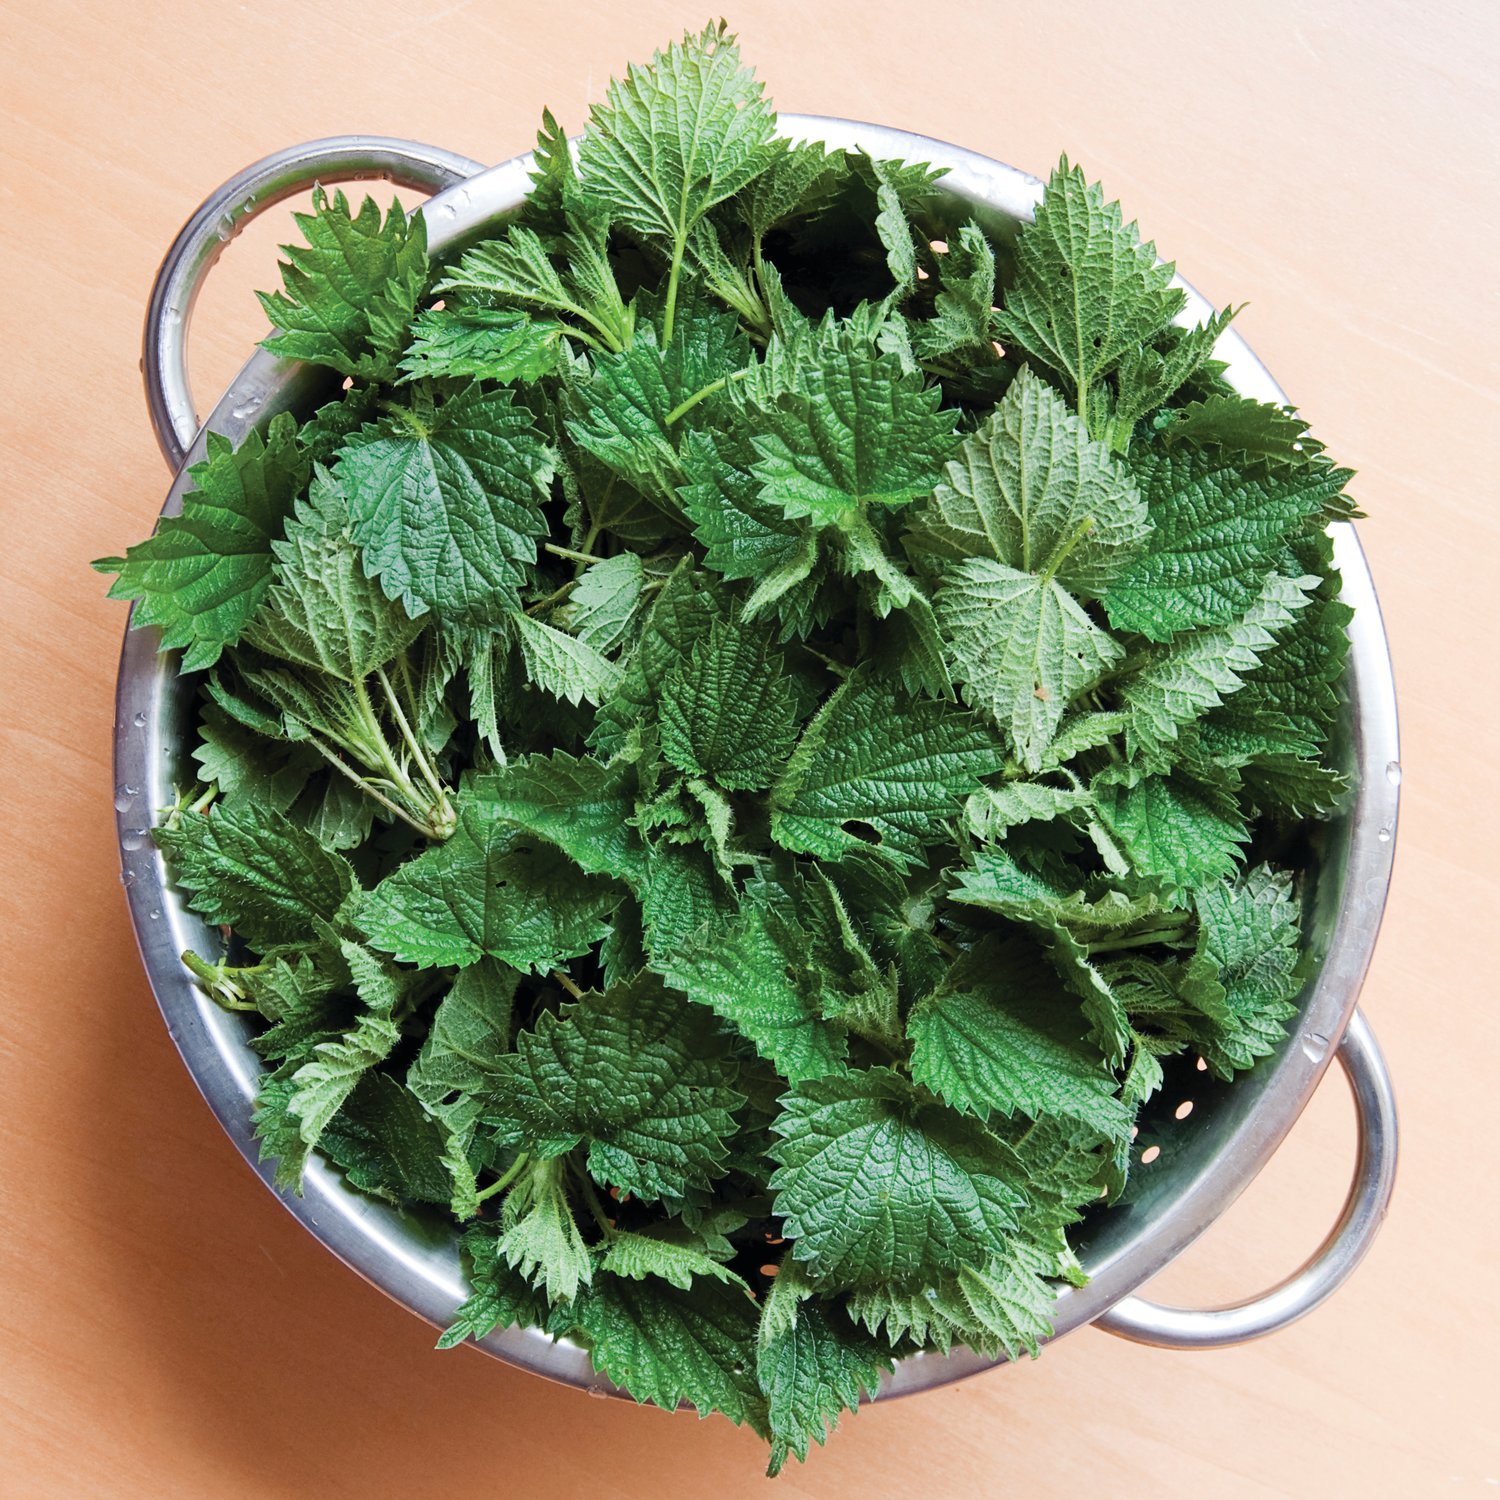 Nettles in a colander ready for washing.